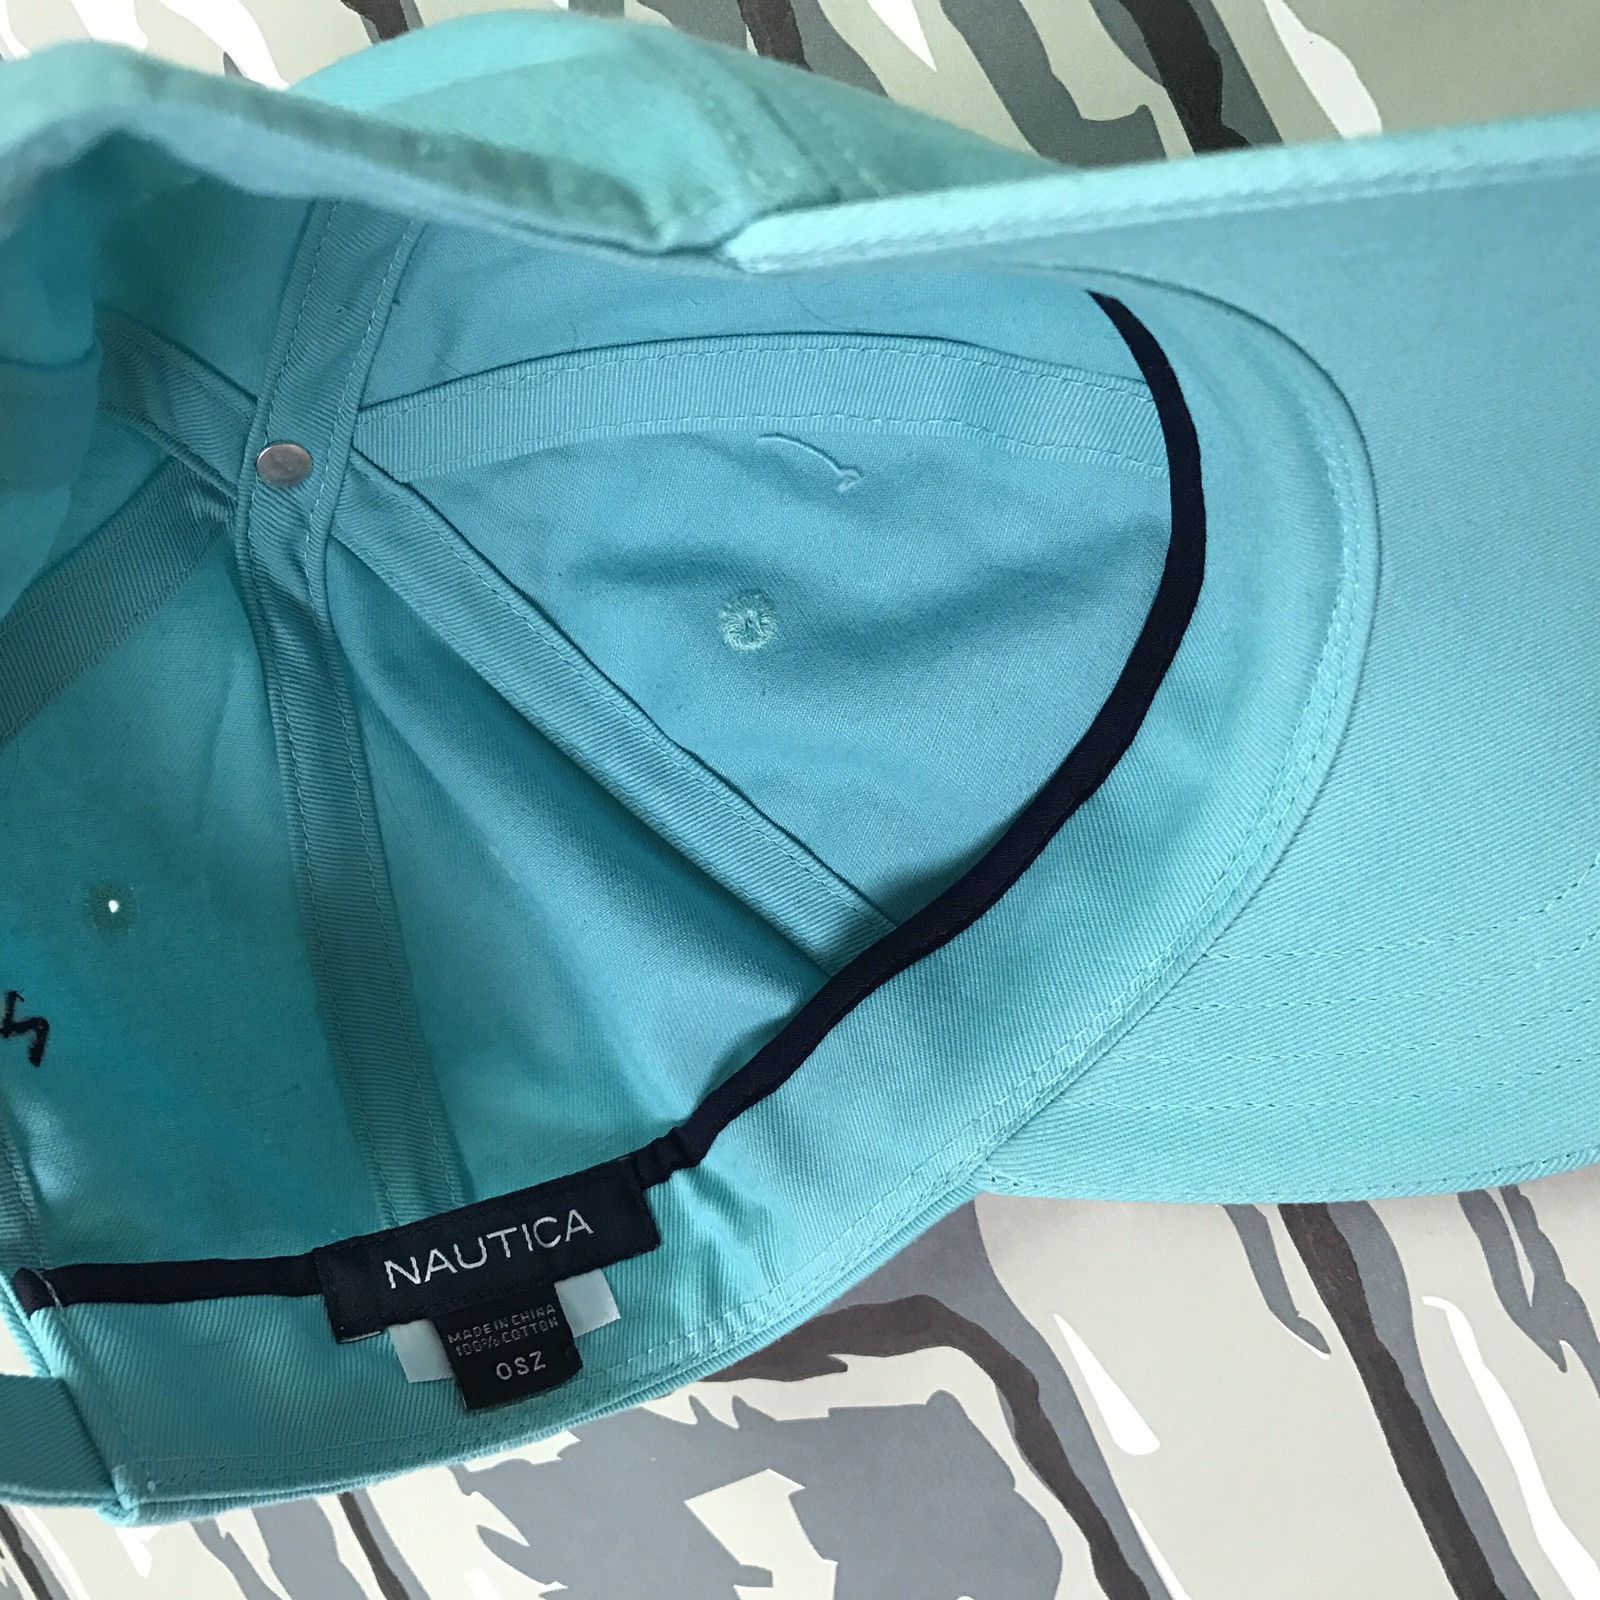 Nautica Nautica Teal Strapback Hat Worn Once Size ONE SIZE - 4 Preview